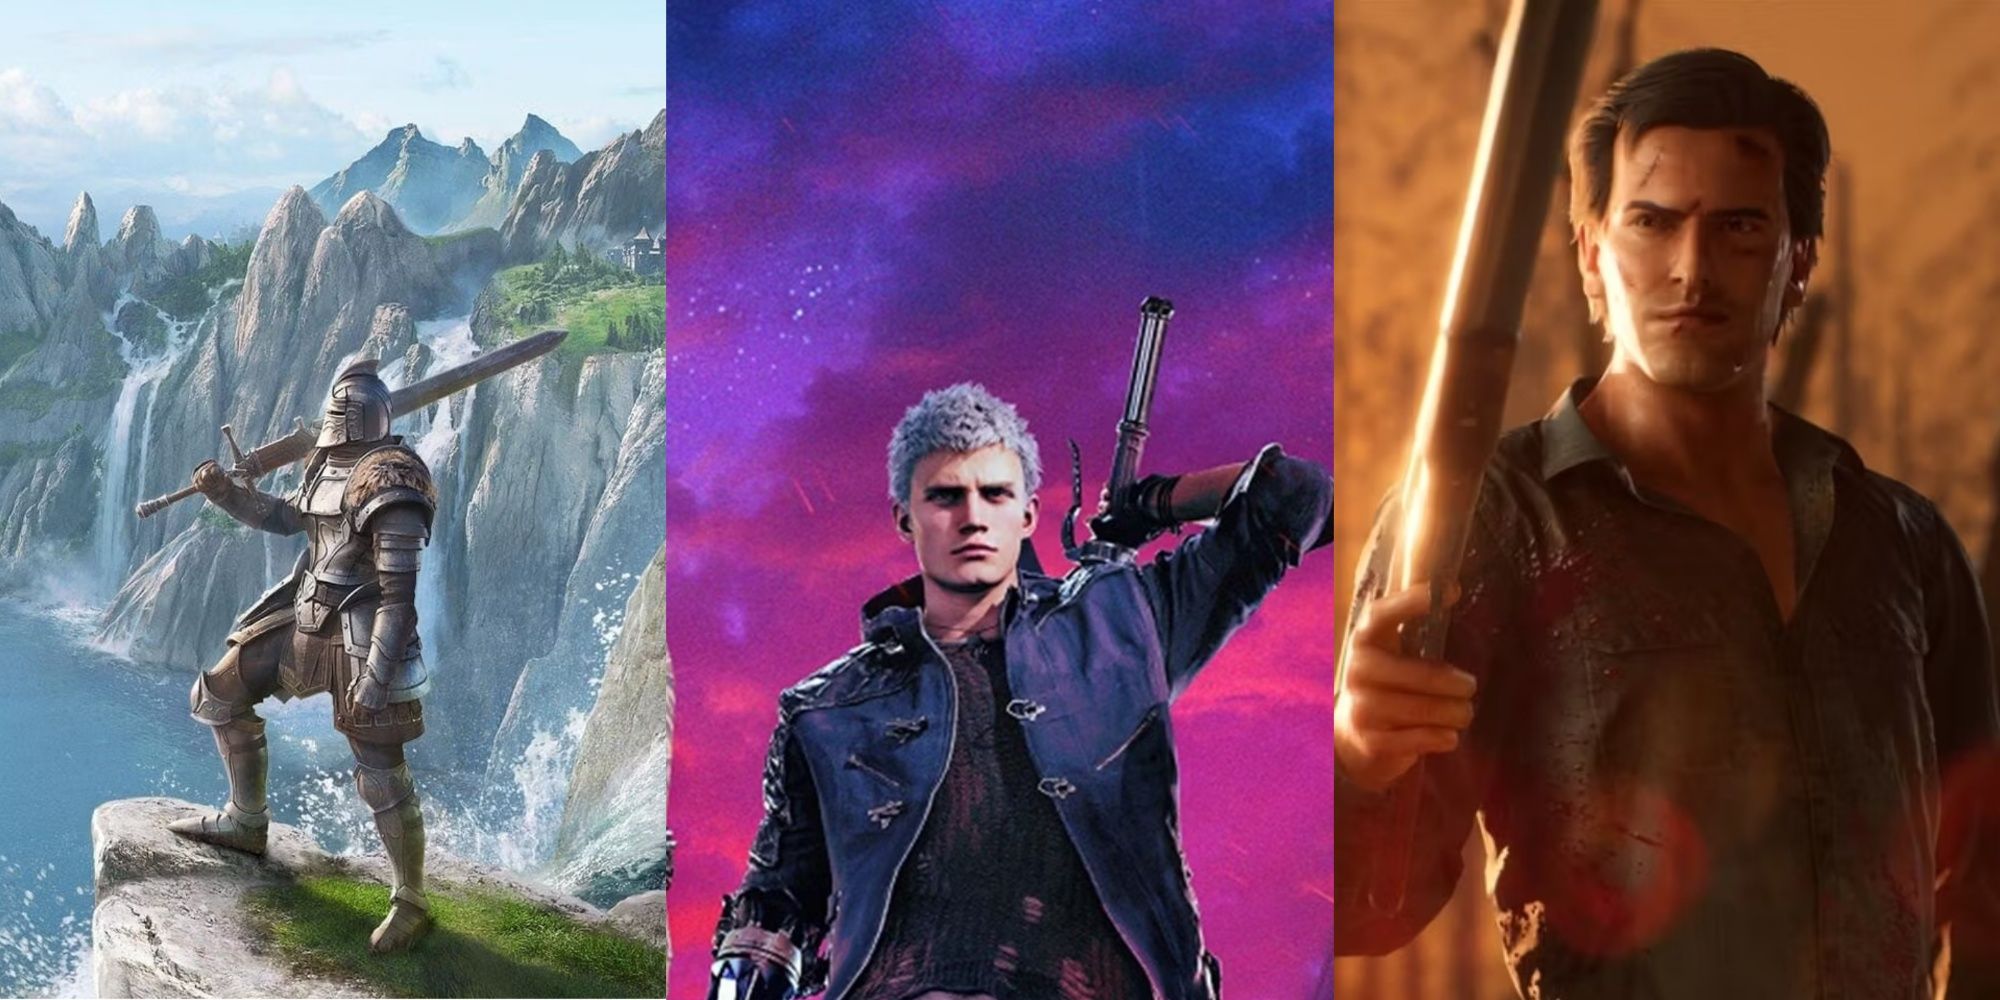 The 15 Hardest PS4 Games Ever Made, Ranked